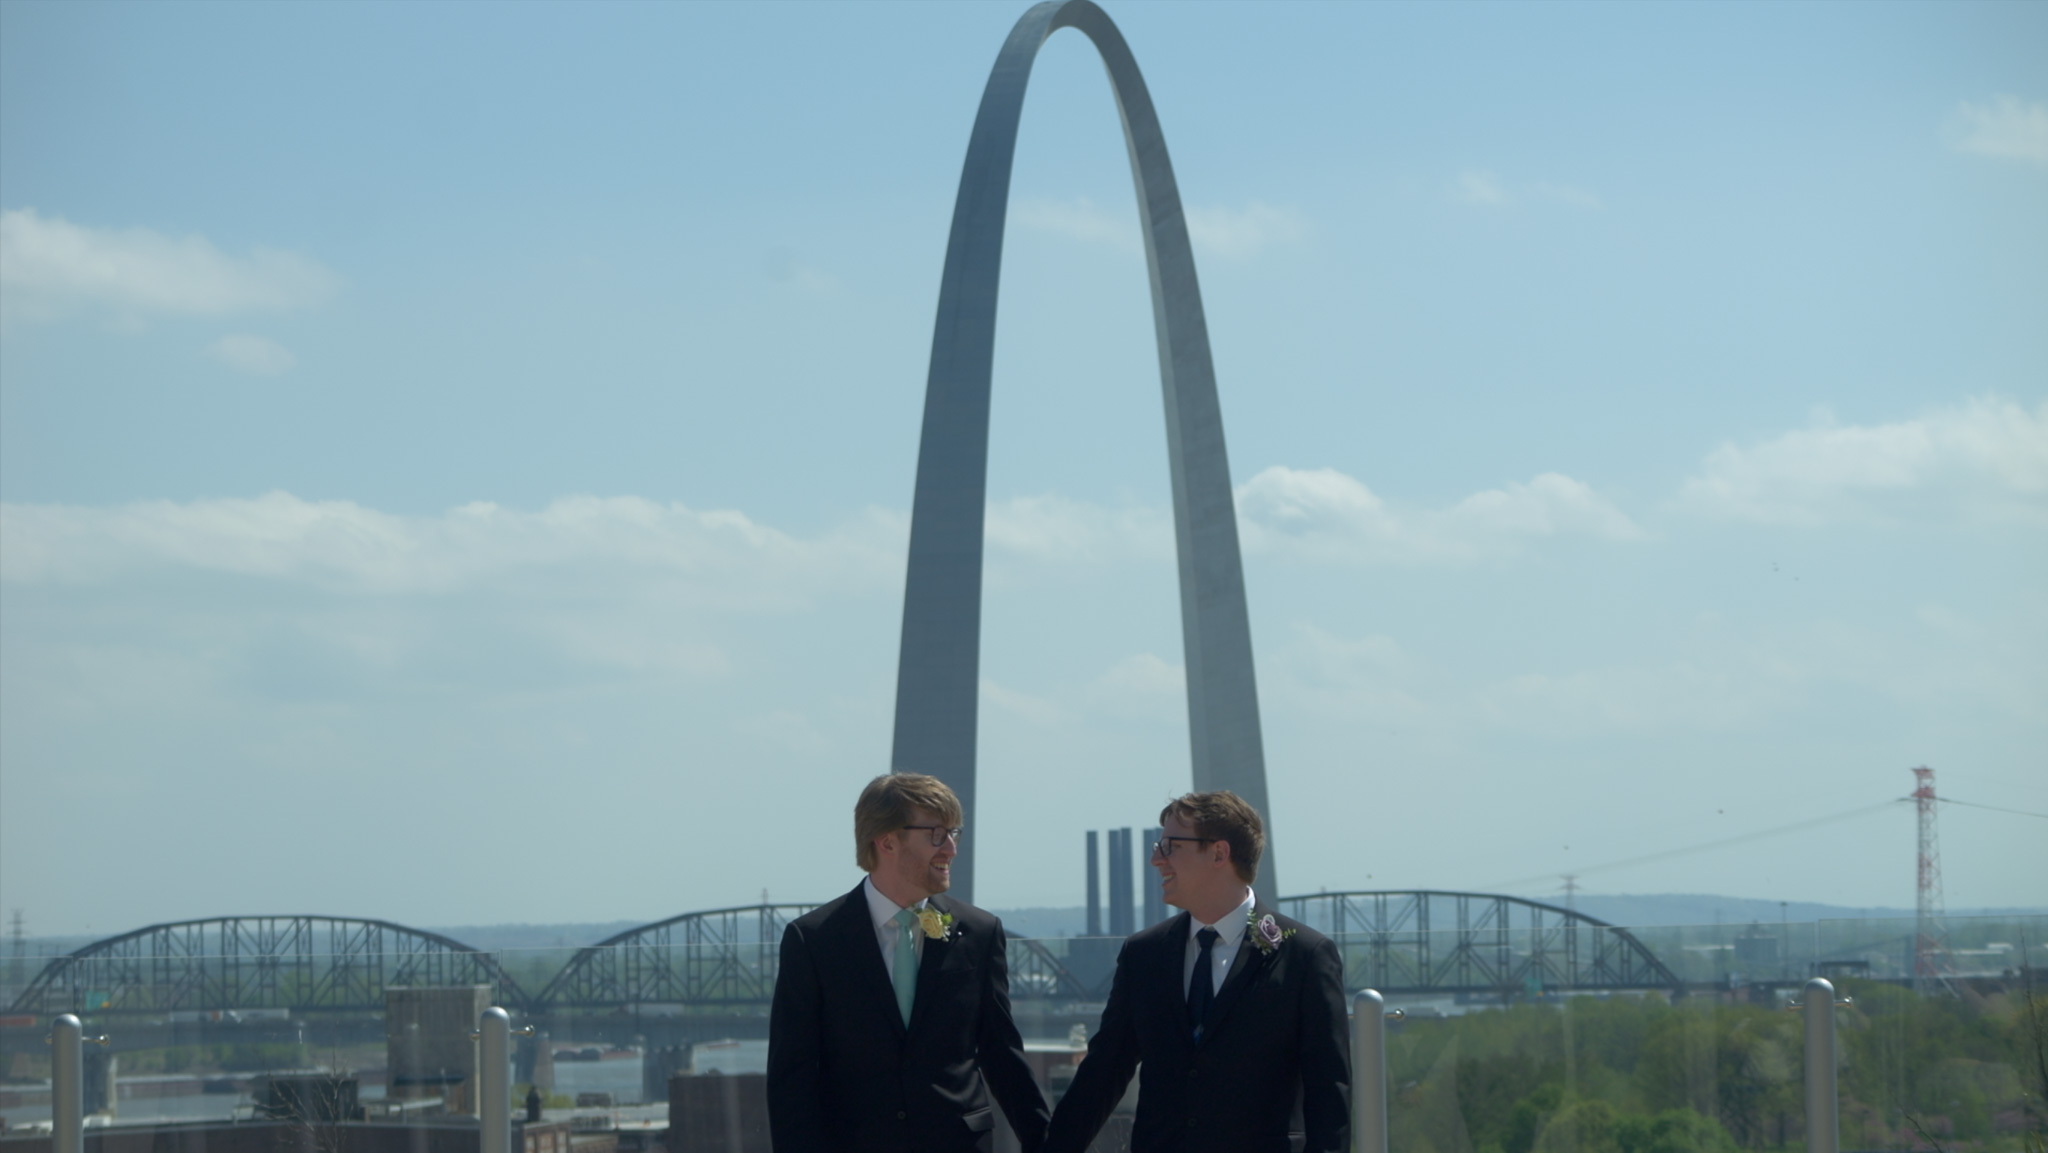 Two white gay men hold hands at their wedding, walking toward the camera with a large blue sky and the St. Louis arch in the background.